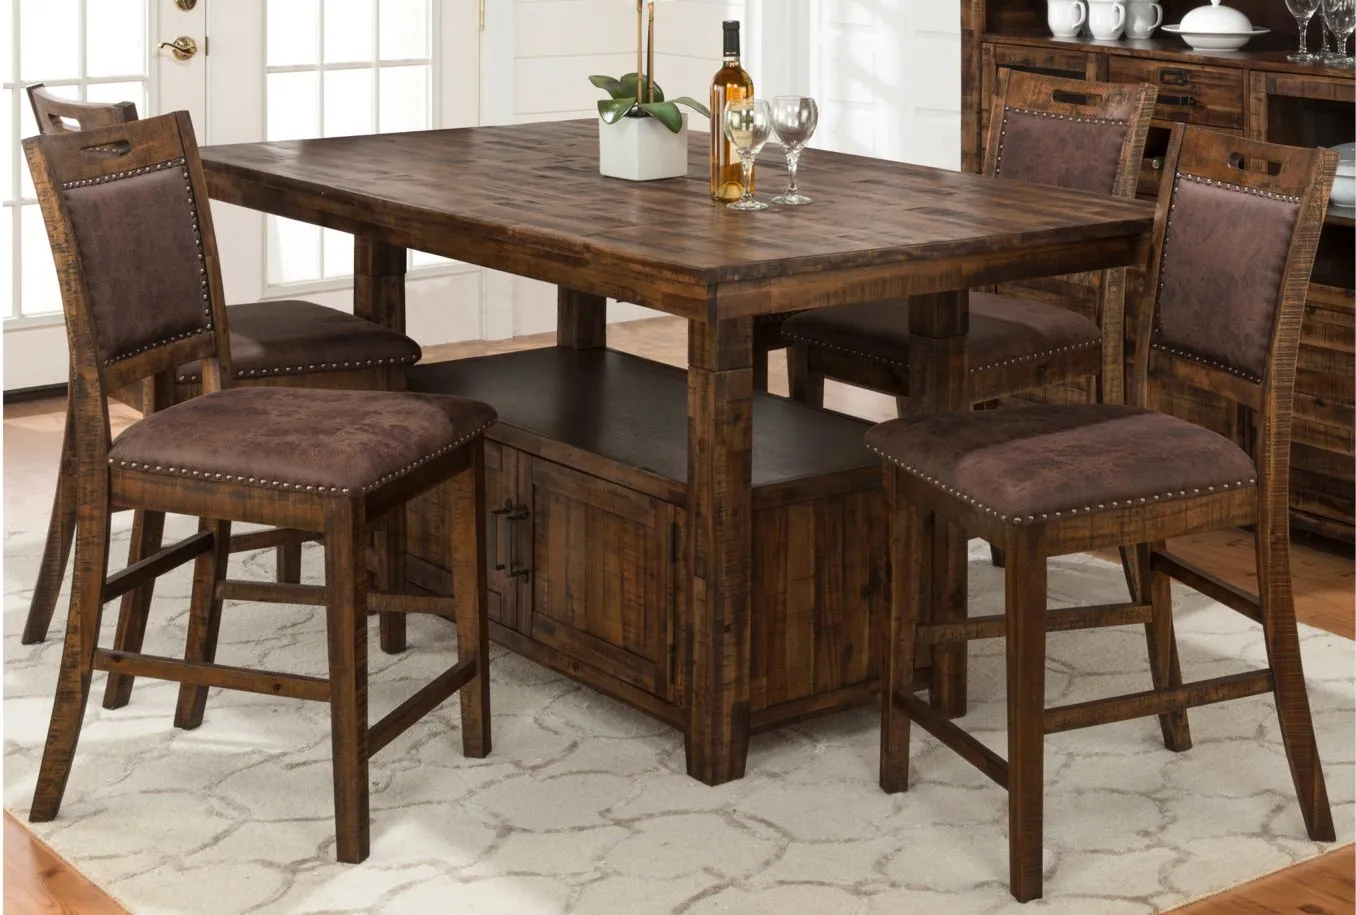 Cannon Valley 5-pc. Counter-Height Dining Set in Brown / Distressed Medium Brown by Jofran